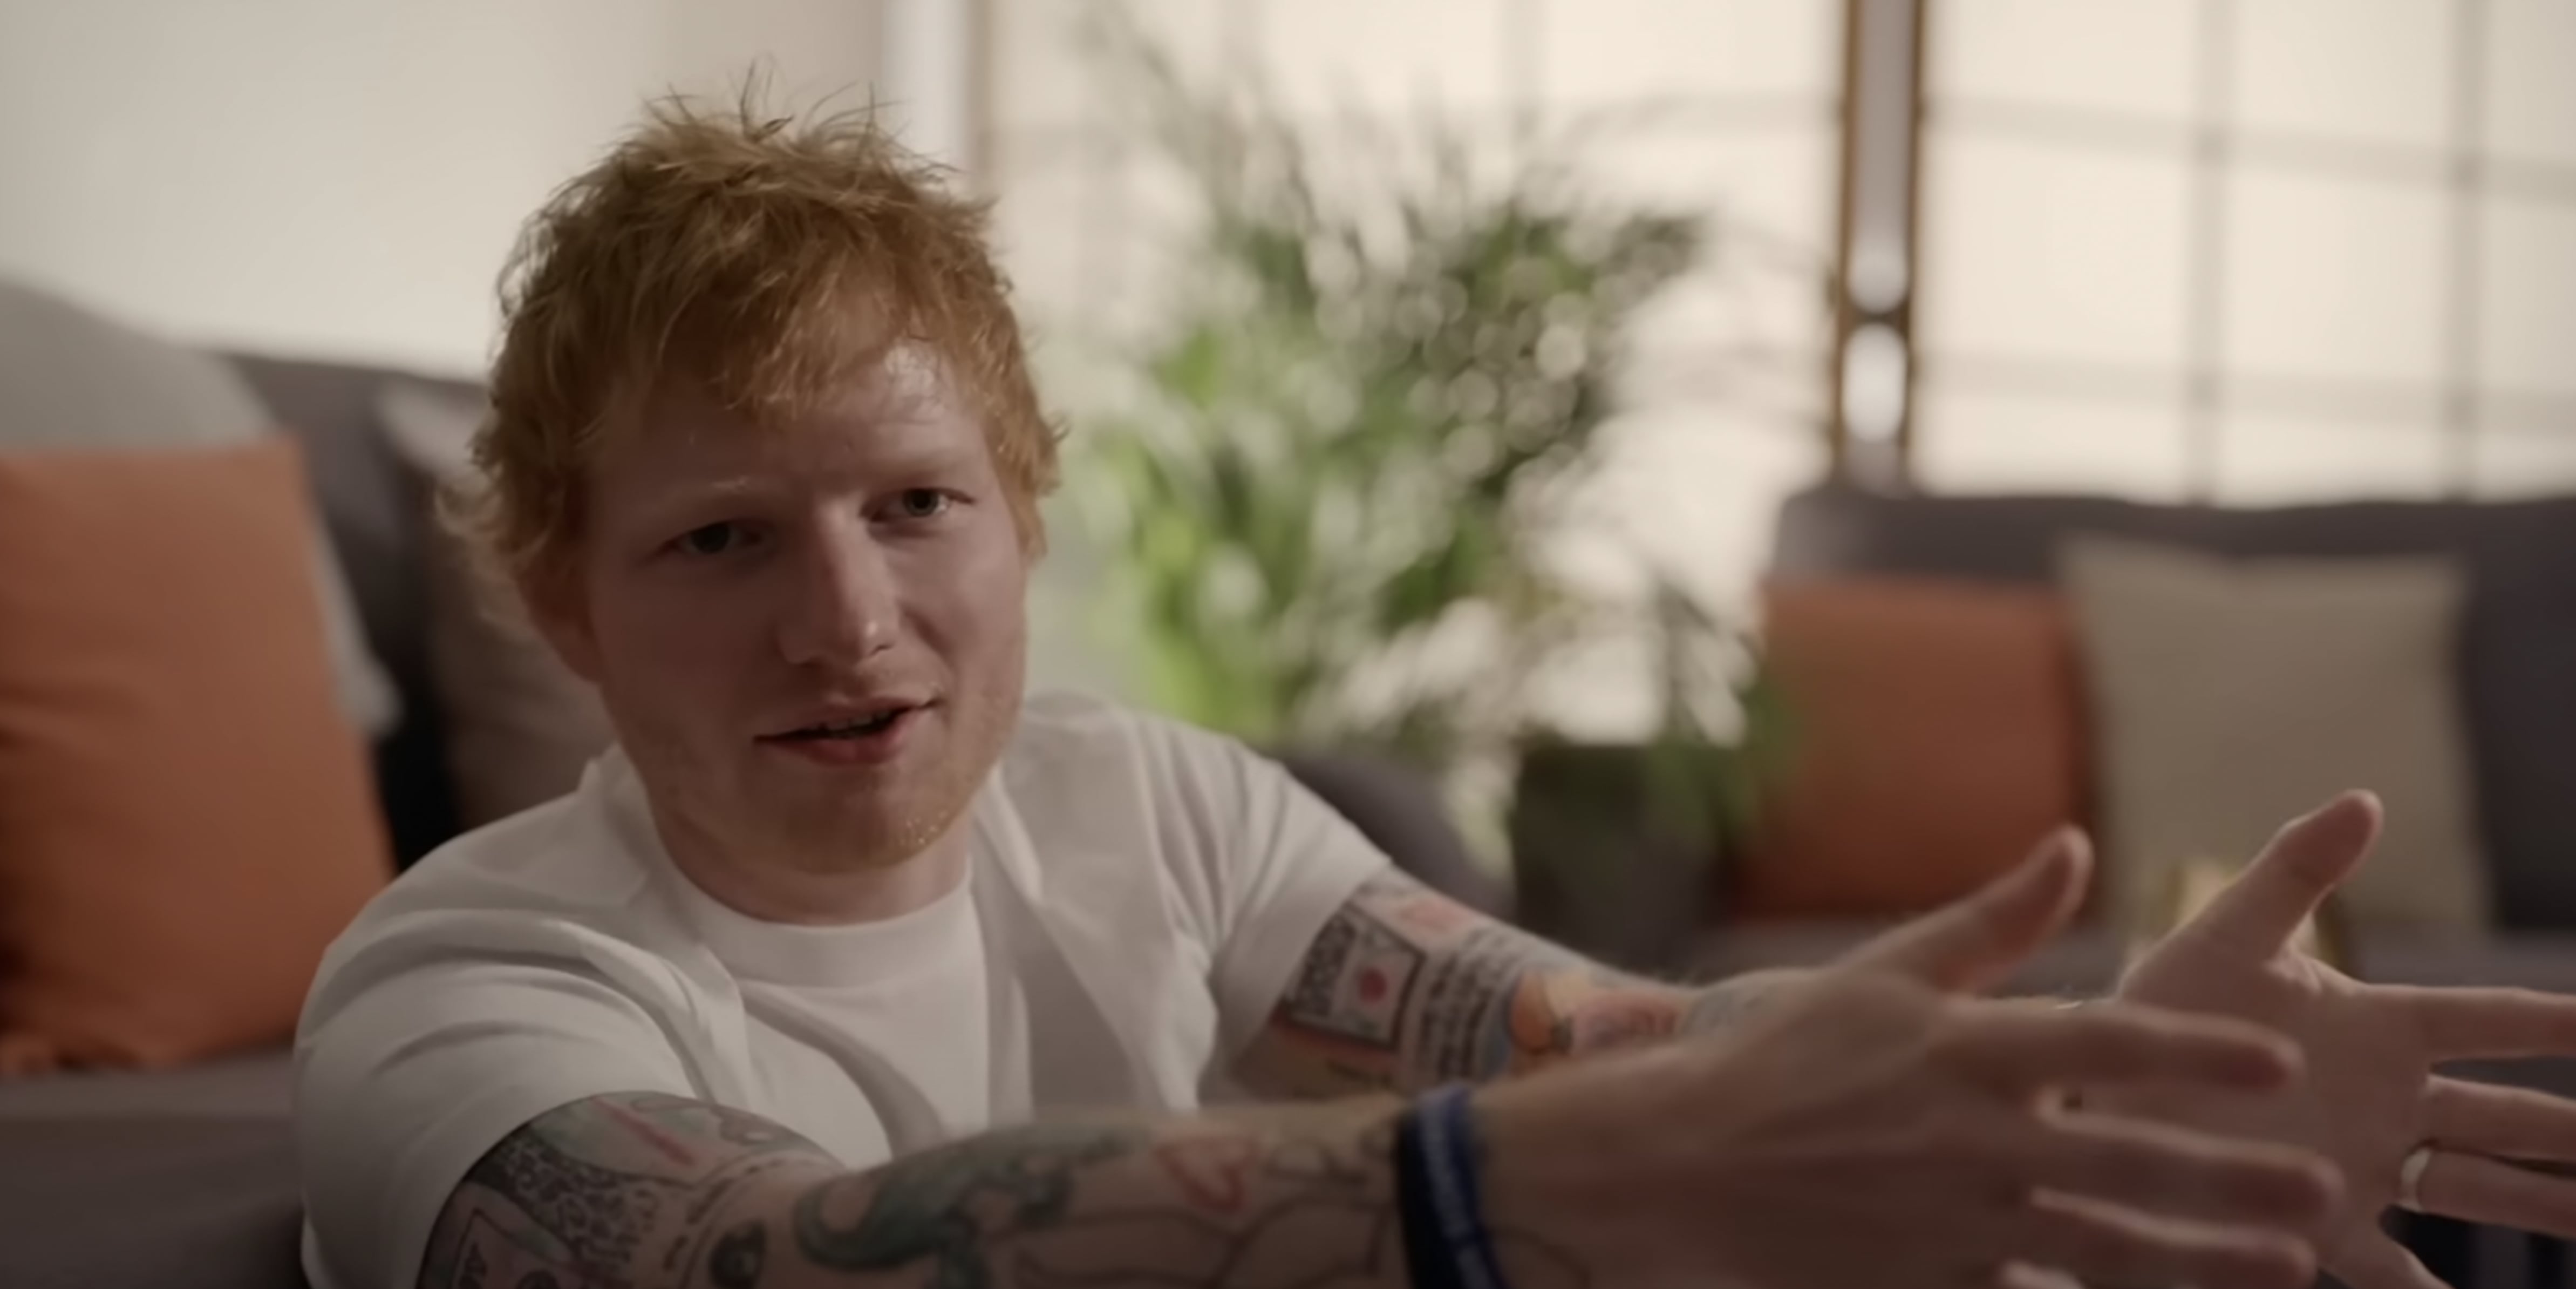 Ed Sheeran docuseries The Sum of It All focuses on grief, wife